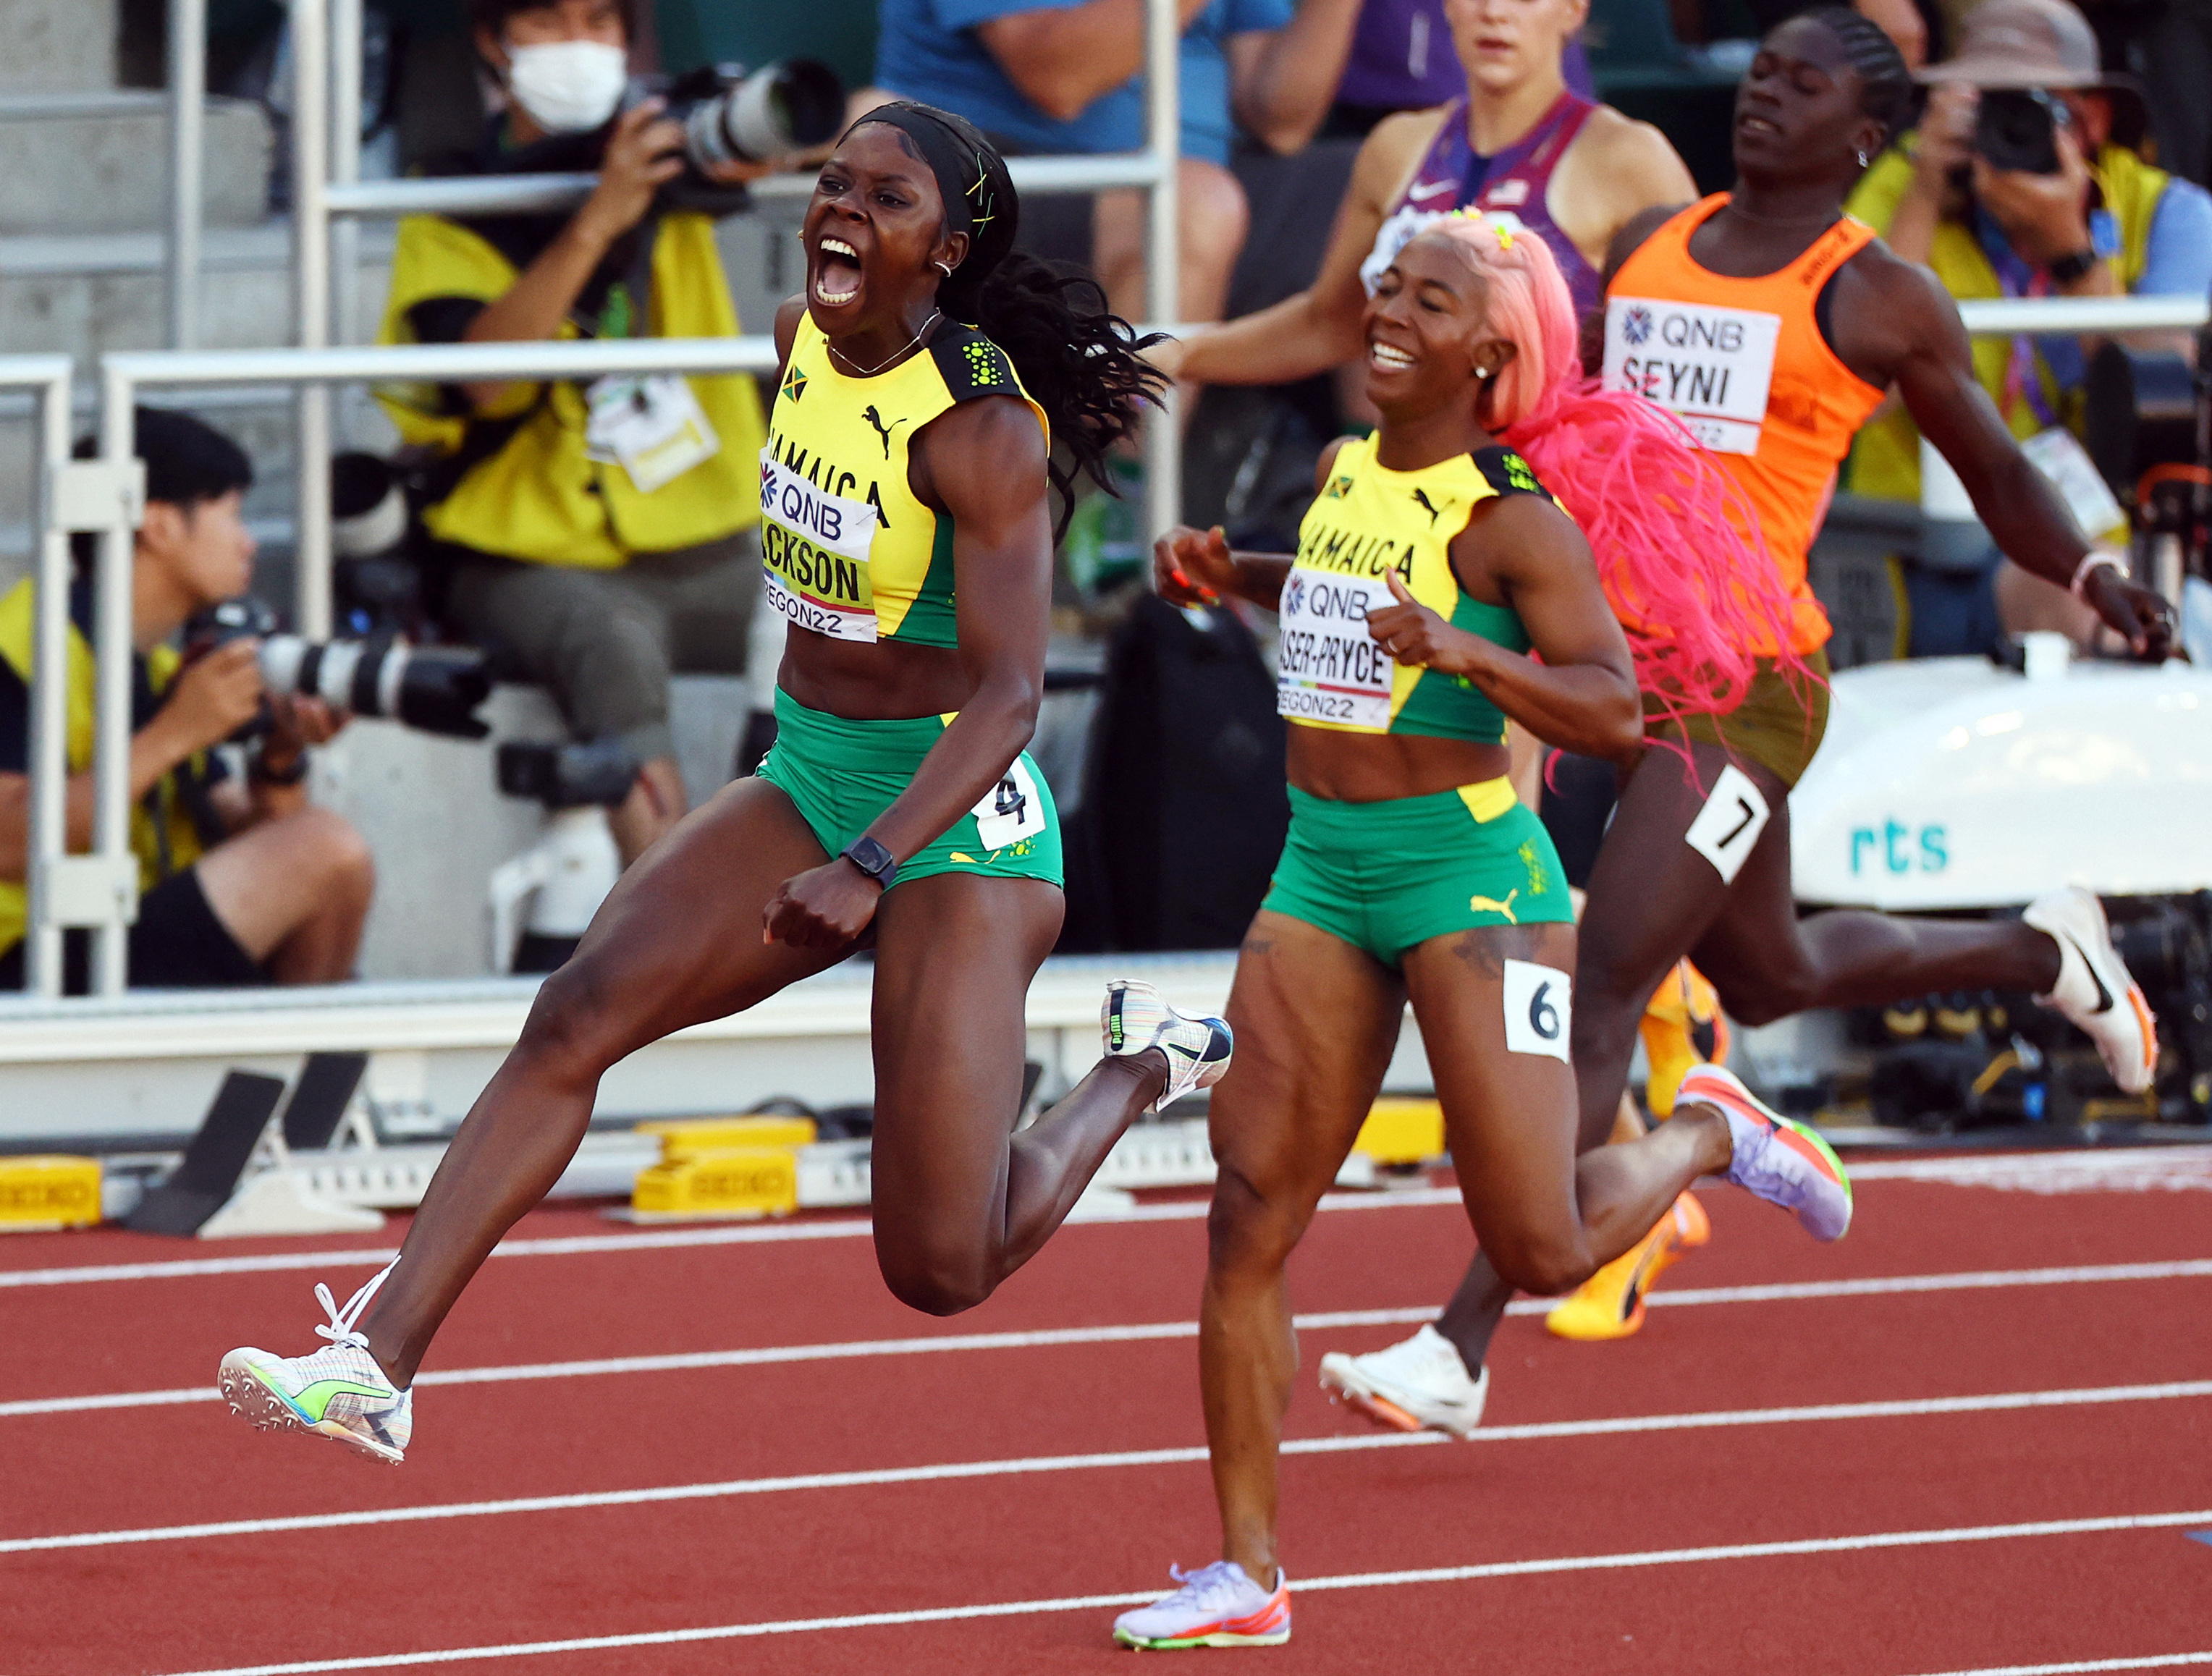 Athletics - World Athletics Championships - Women's 200 Metres - Final - Hayward Field, Eugene, Oregon, U.S. - July 21, 2022 Jamaica's Shericka Jackson celebrates after crossing the line to win ahead of second placed Jamaica's Shelly-Ann Fraser-Pryce after setting a new world championship record during the women's 200 metres final REUTERS/Mike Segar